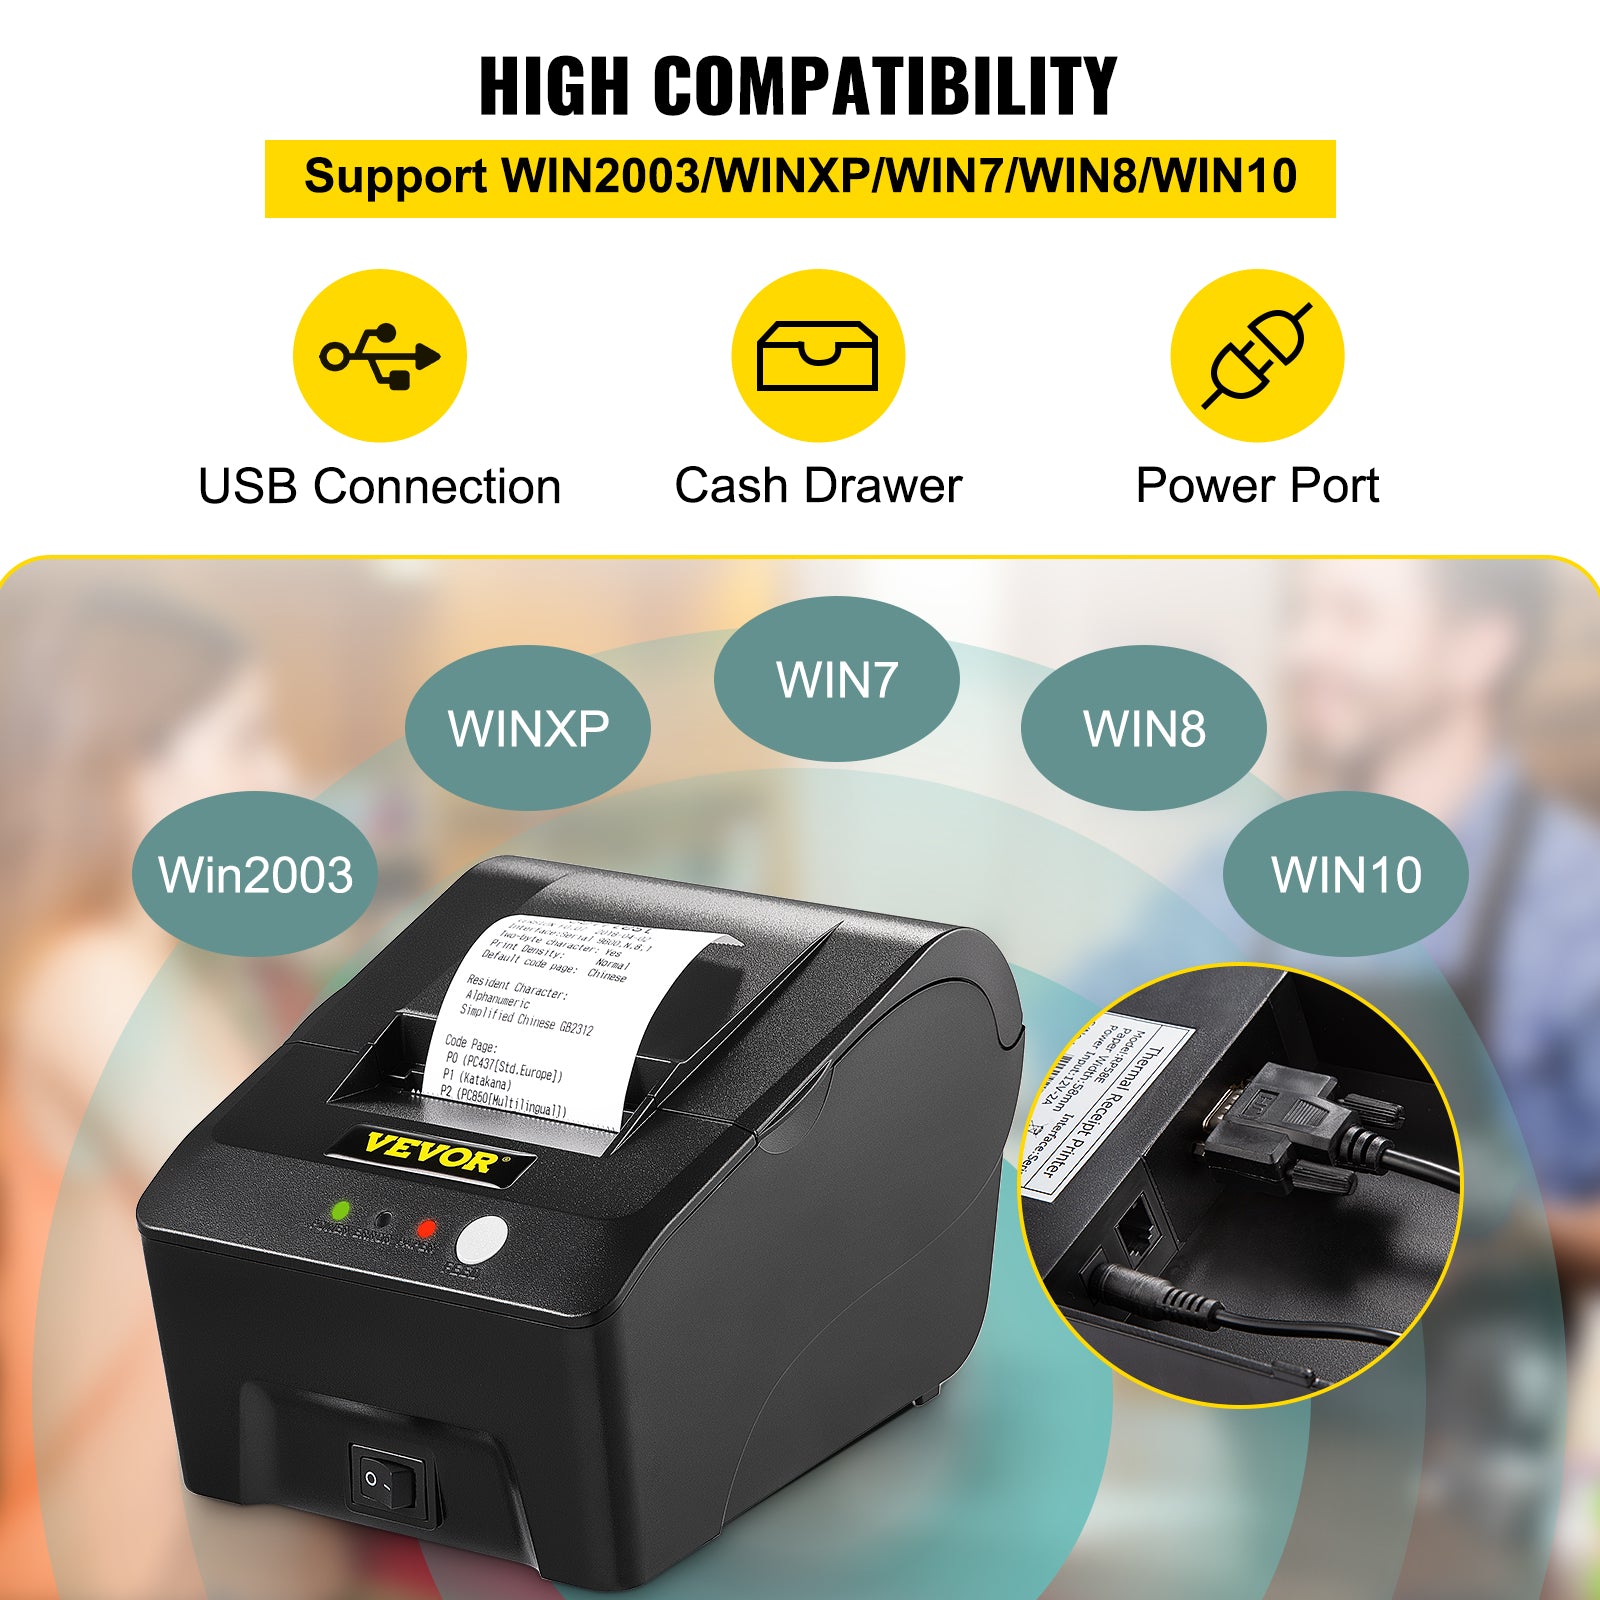 Thermal Receipt Printer, 58mm Label Printing, USB Connectivity